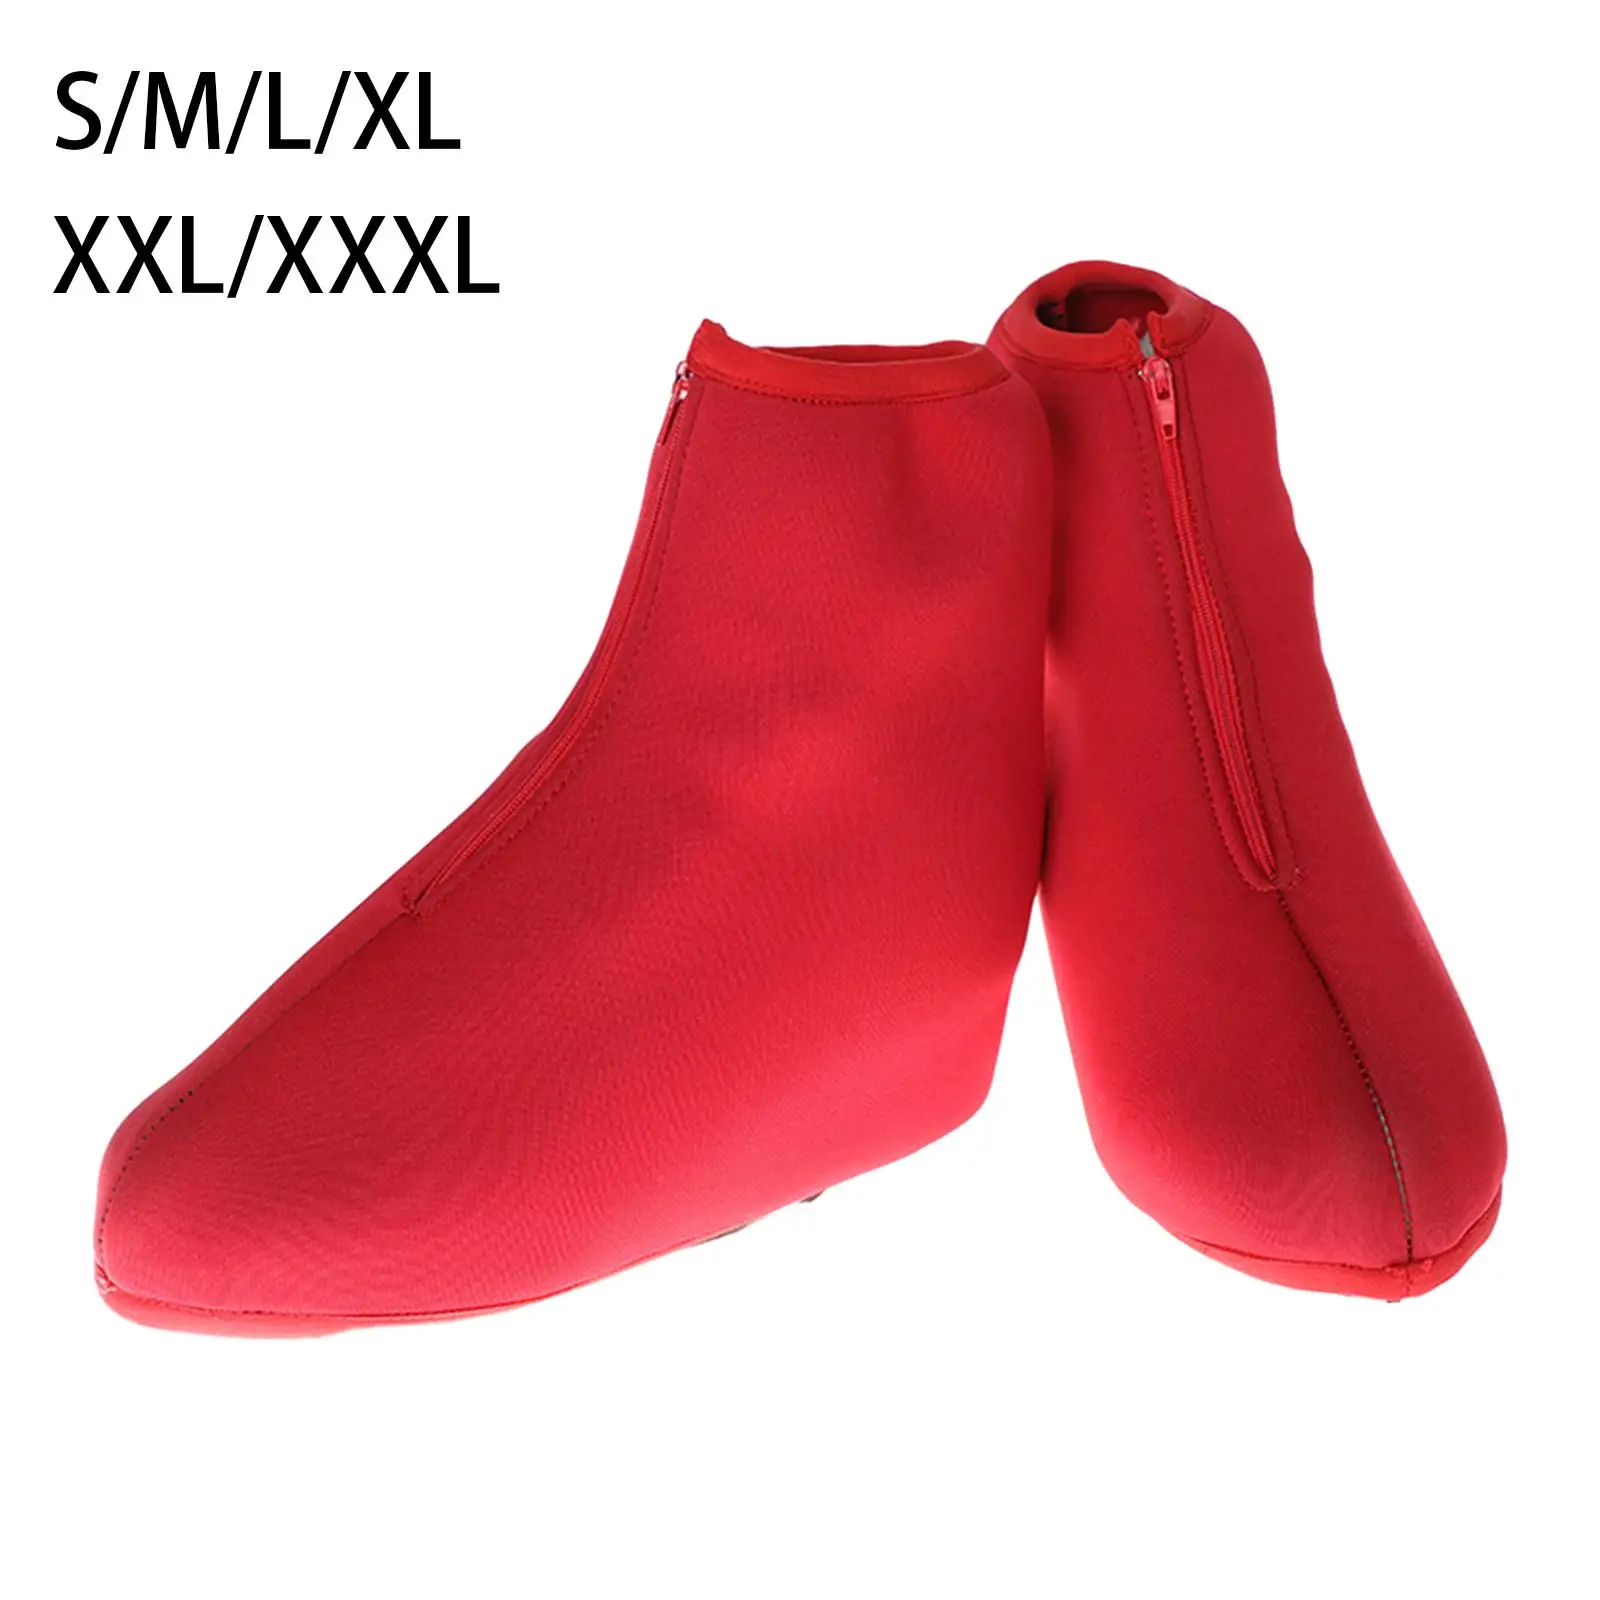 1 Pair Ice Skate Boot Covers Durable Figure Skating Boot Covers Protective Men Women for Roller Skates Ice Skating Figure Skates